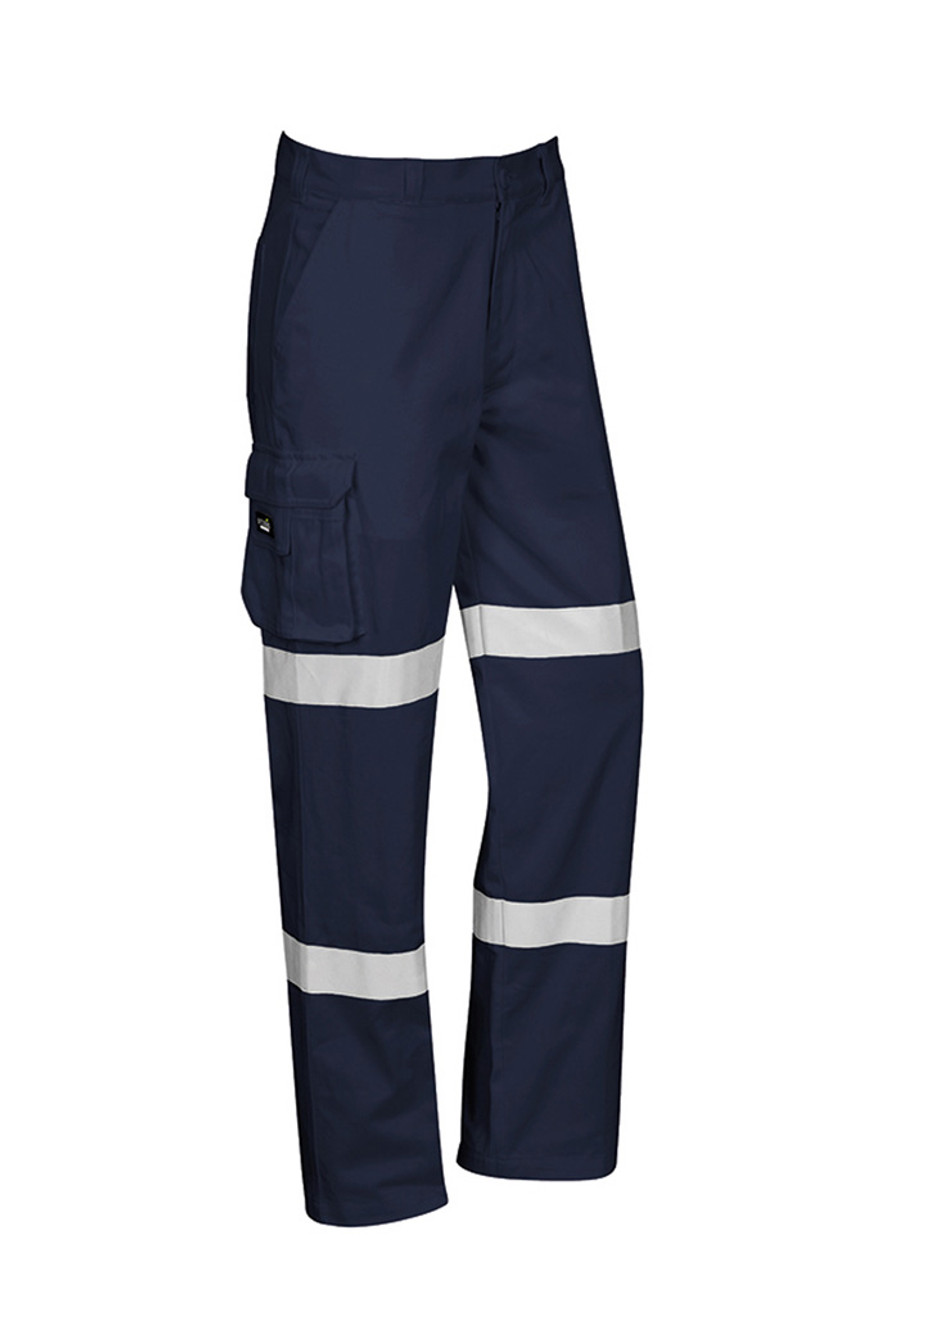 Syzmik ZP920 Mens Bio Motion Taped Pant | Available Colours: Navy, White